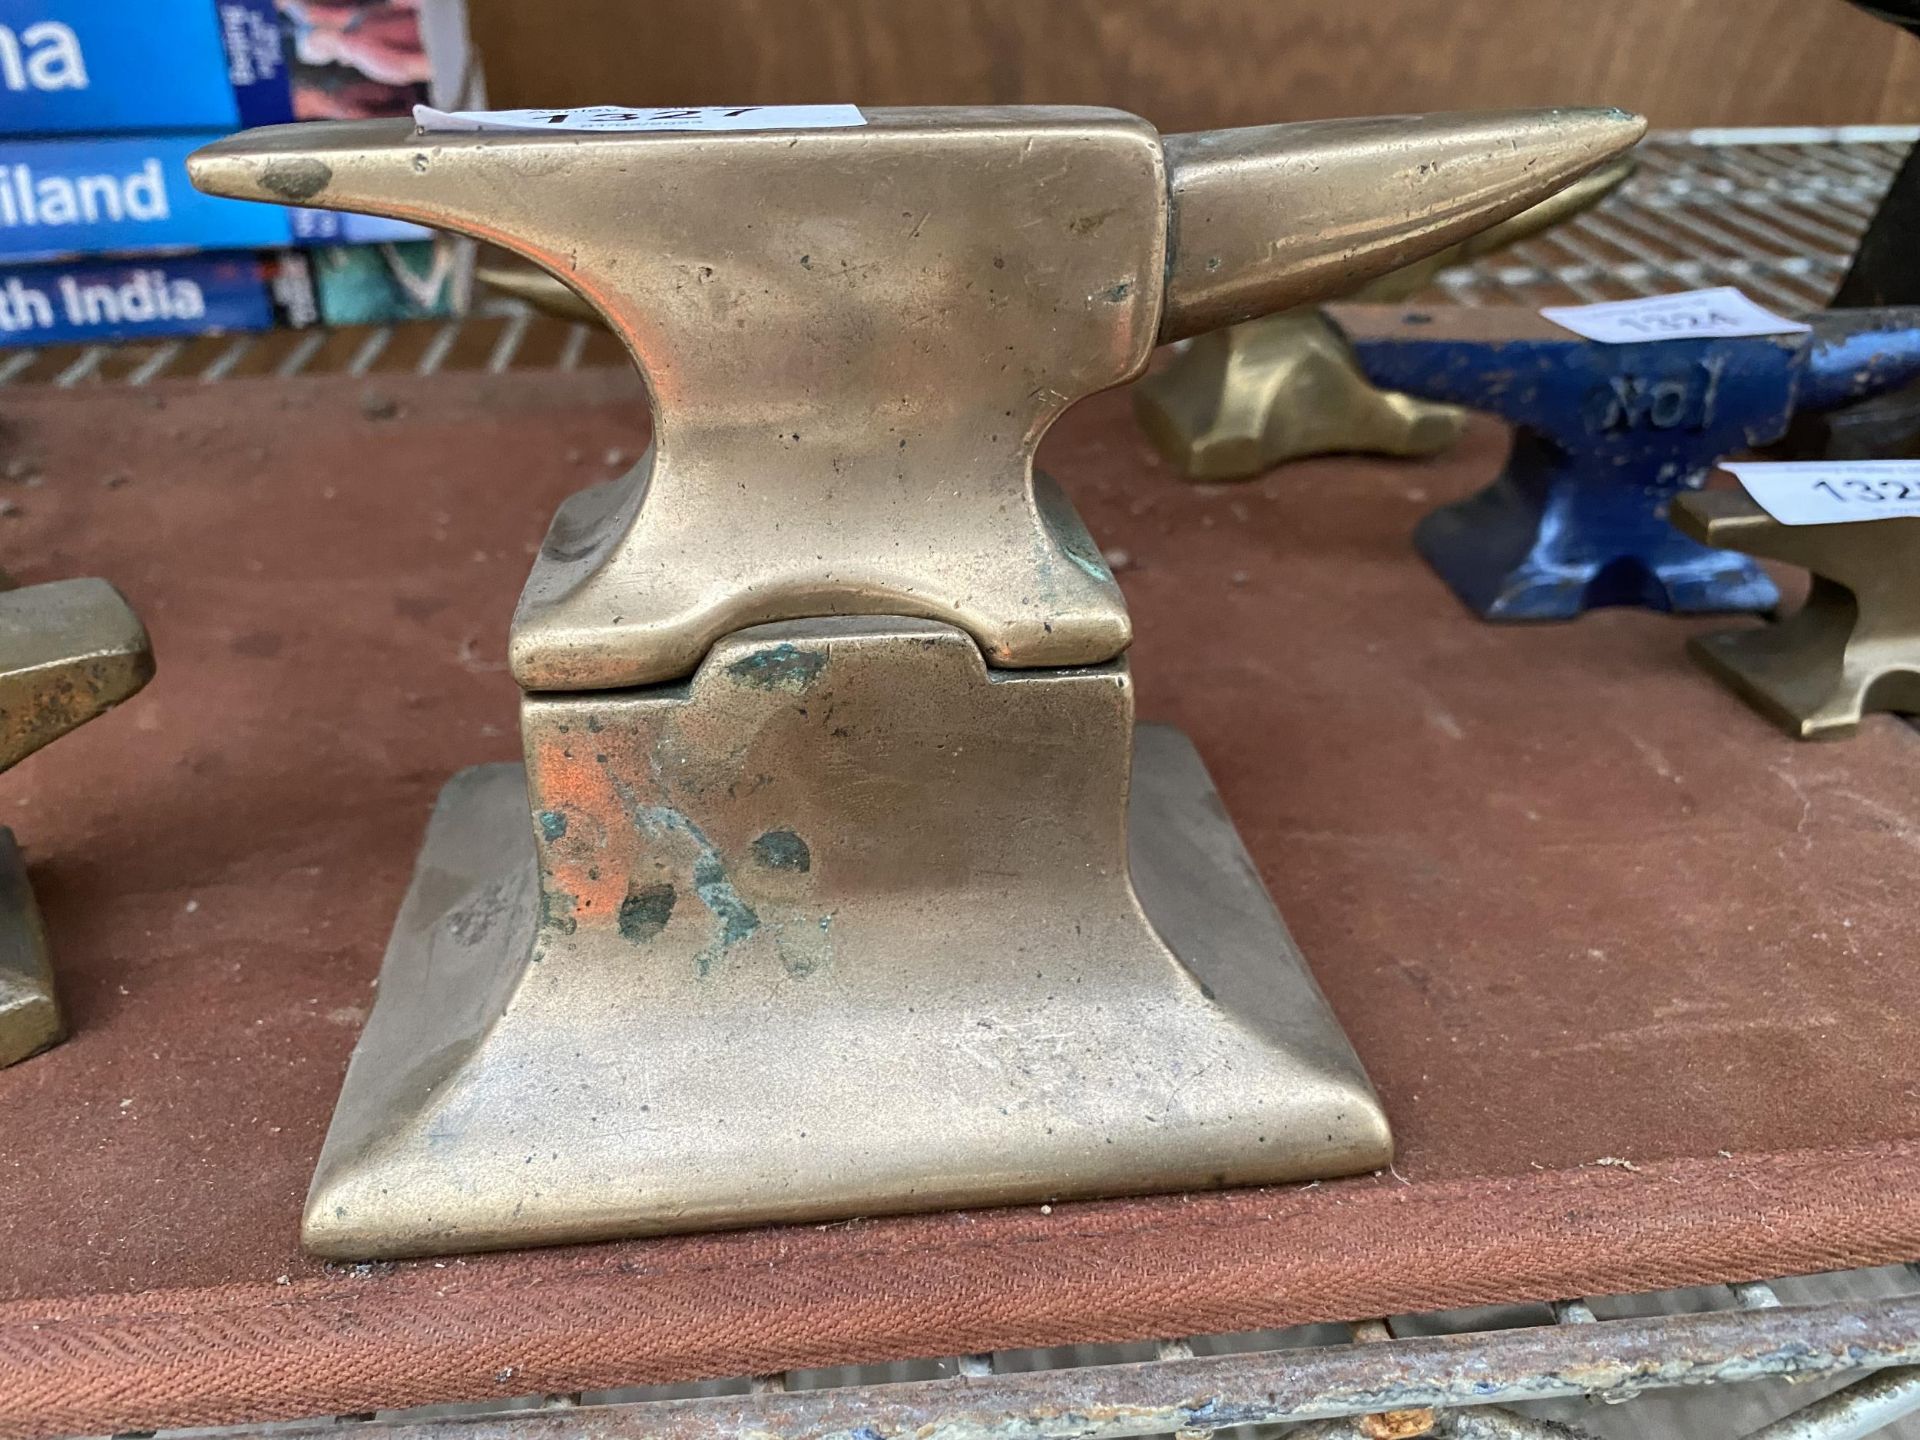 A MINITURE BRASS SAMPLE ANVIL WITH BRASS STAND